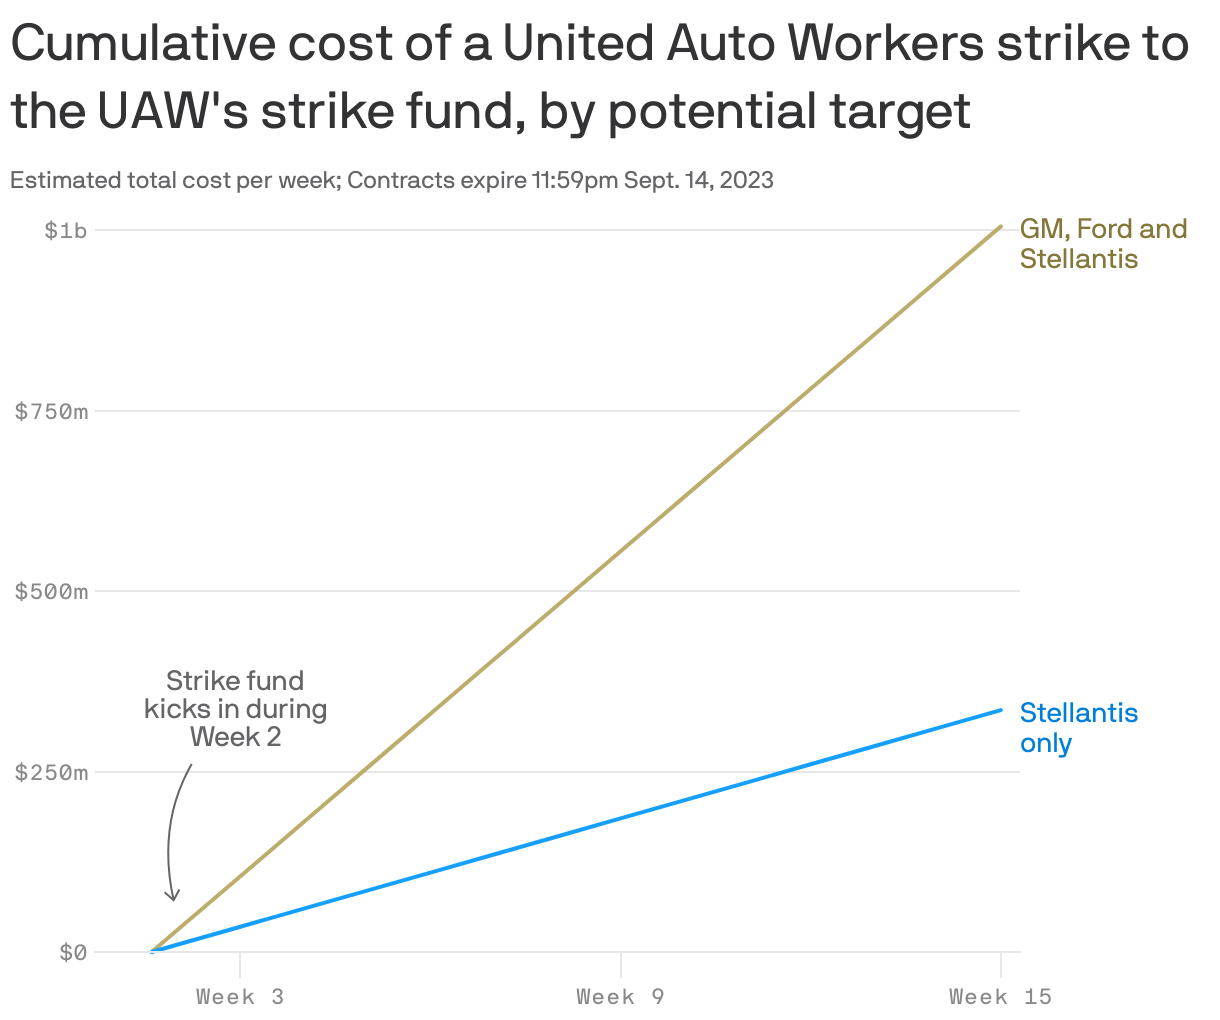 Cumulative cost of a United Auto Workers strike, by potential target